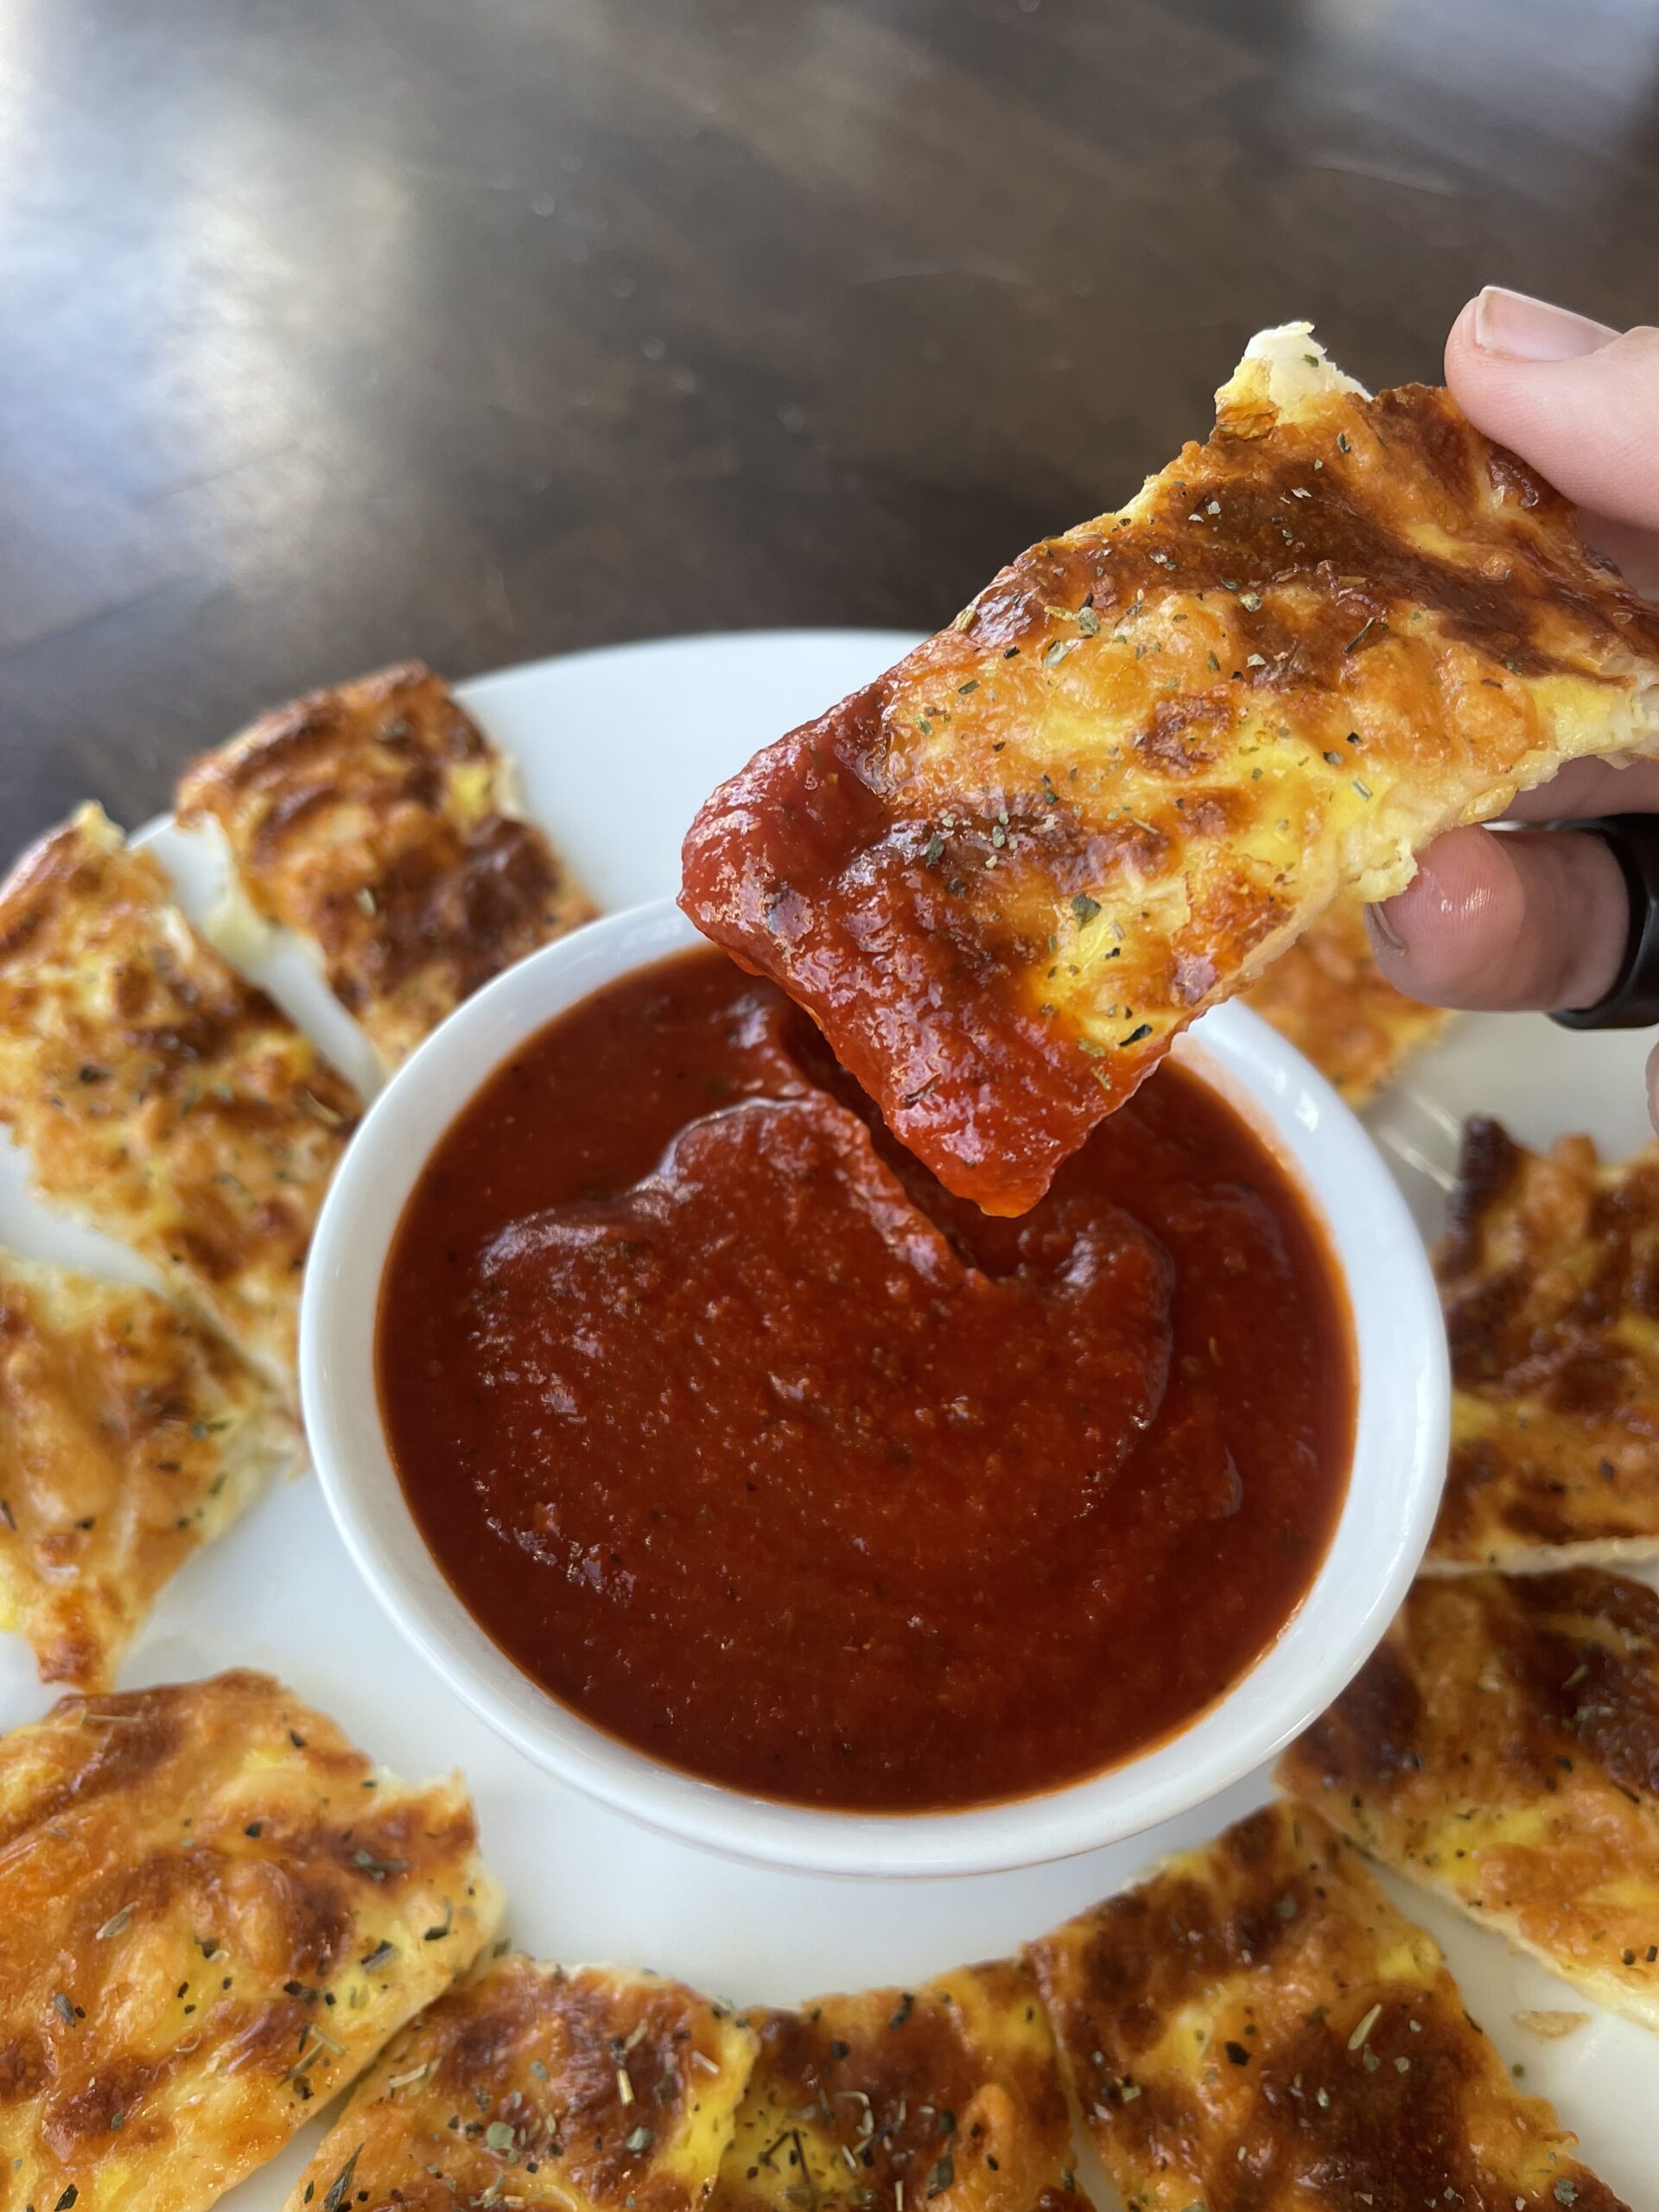 Low Carb Cheesy Bread